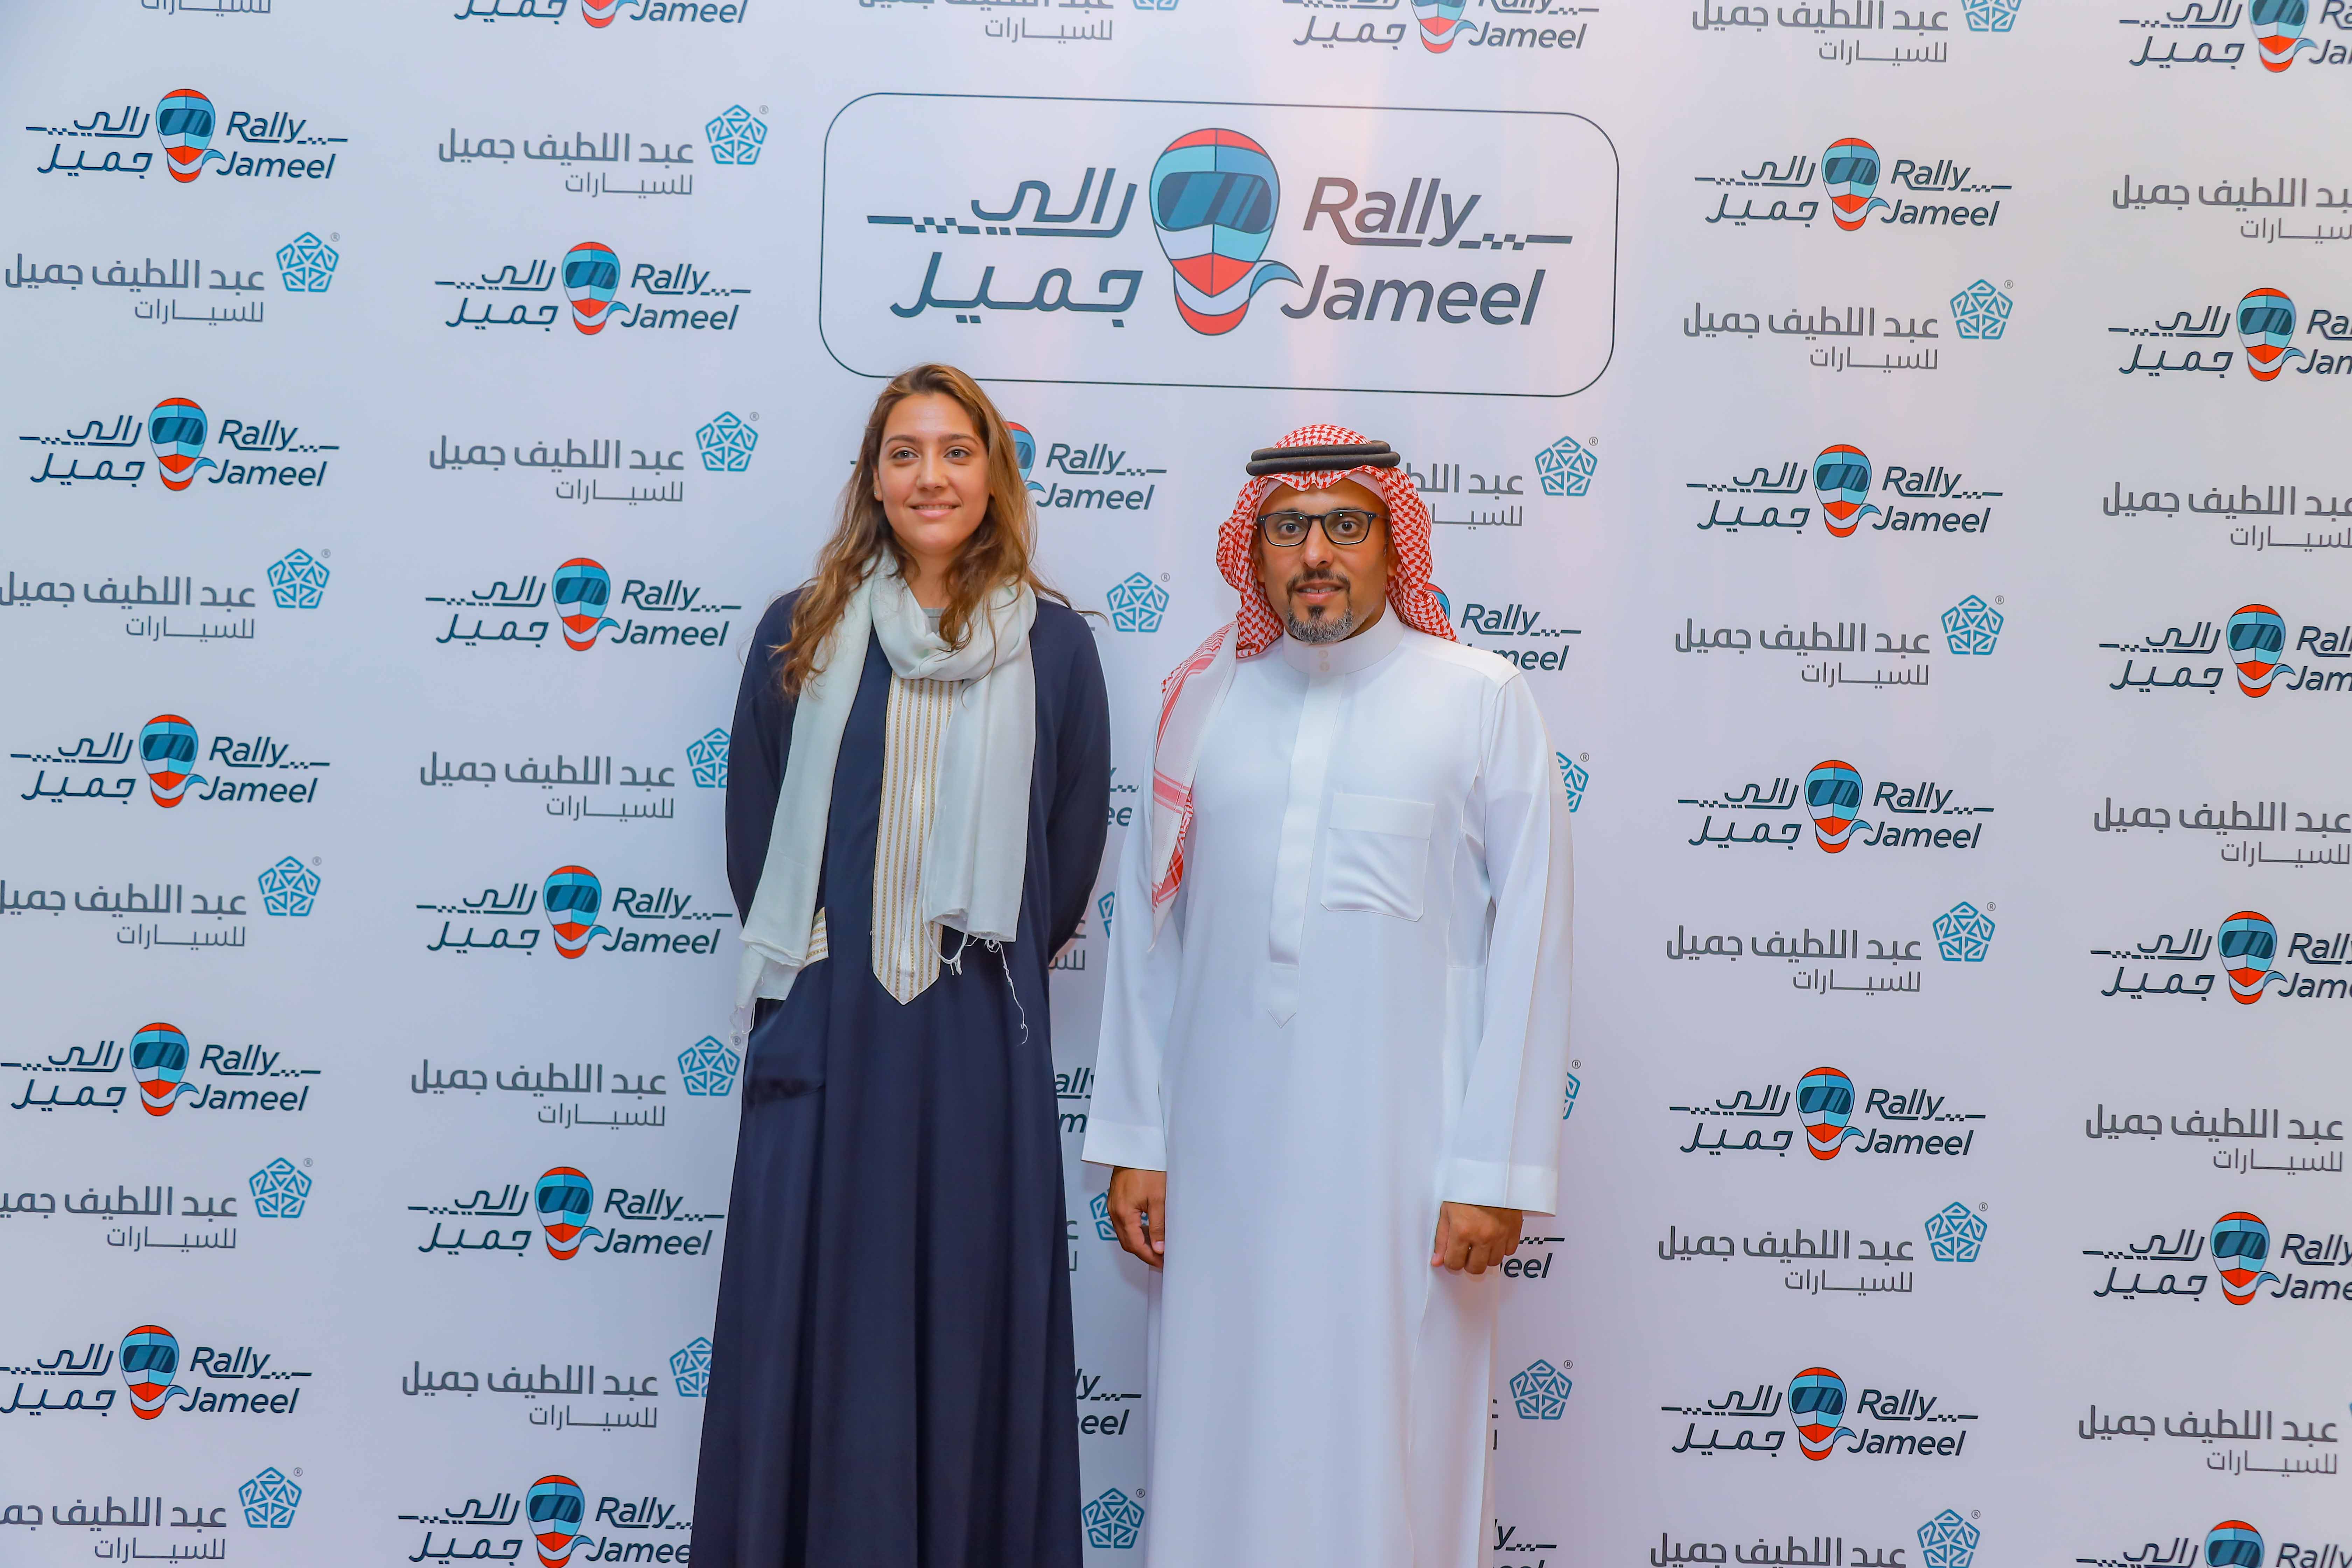 Limited Spaces Left As Women Sign Up To Rally Jameel, Saudi Arabia’s First-Ever Women-Only Motorsport Event